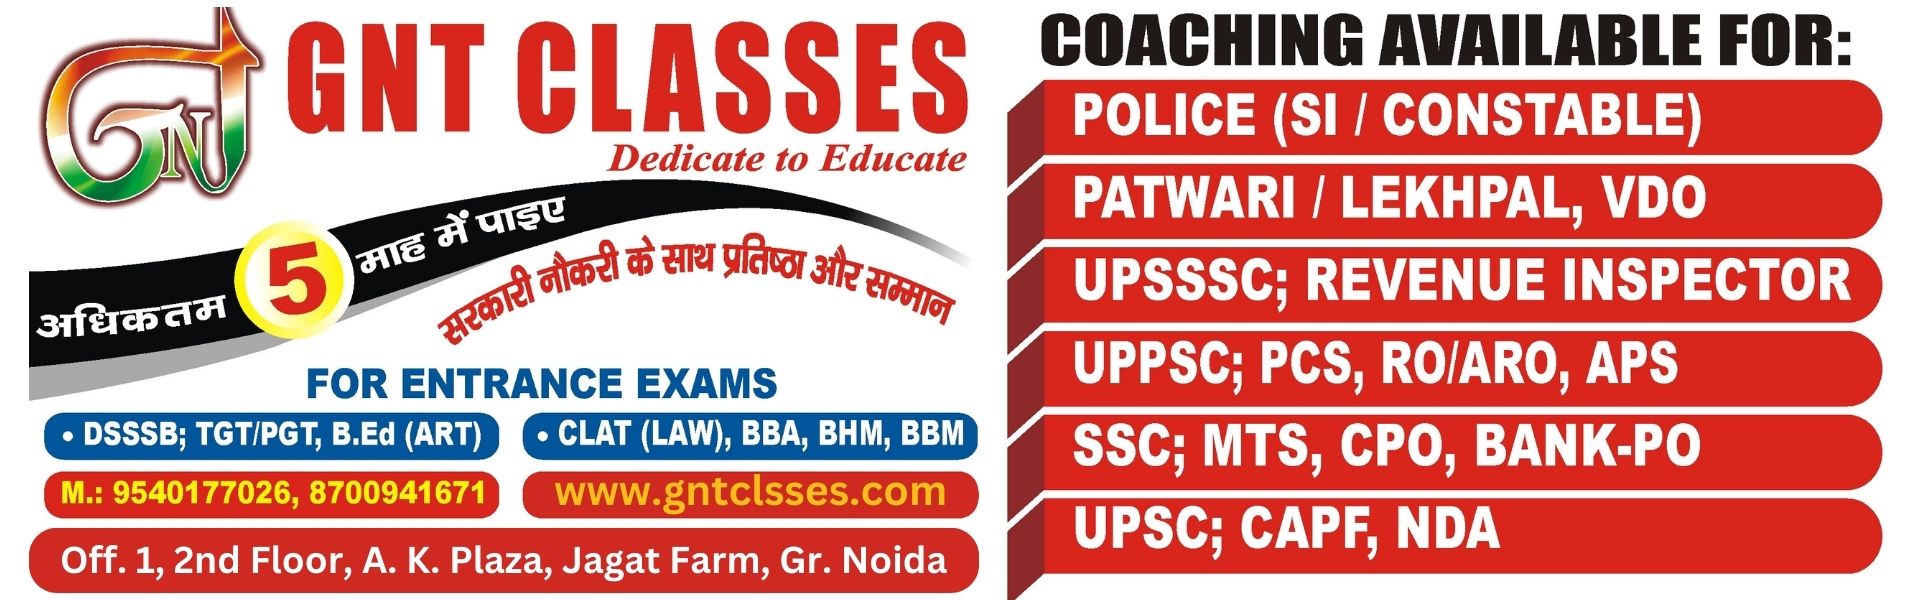 Coaching For SSC, UP Police, PET in Greater Noida